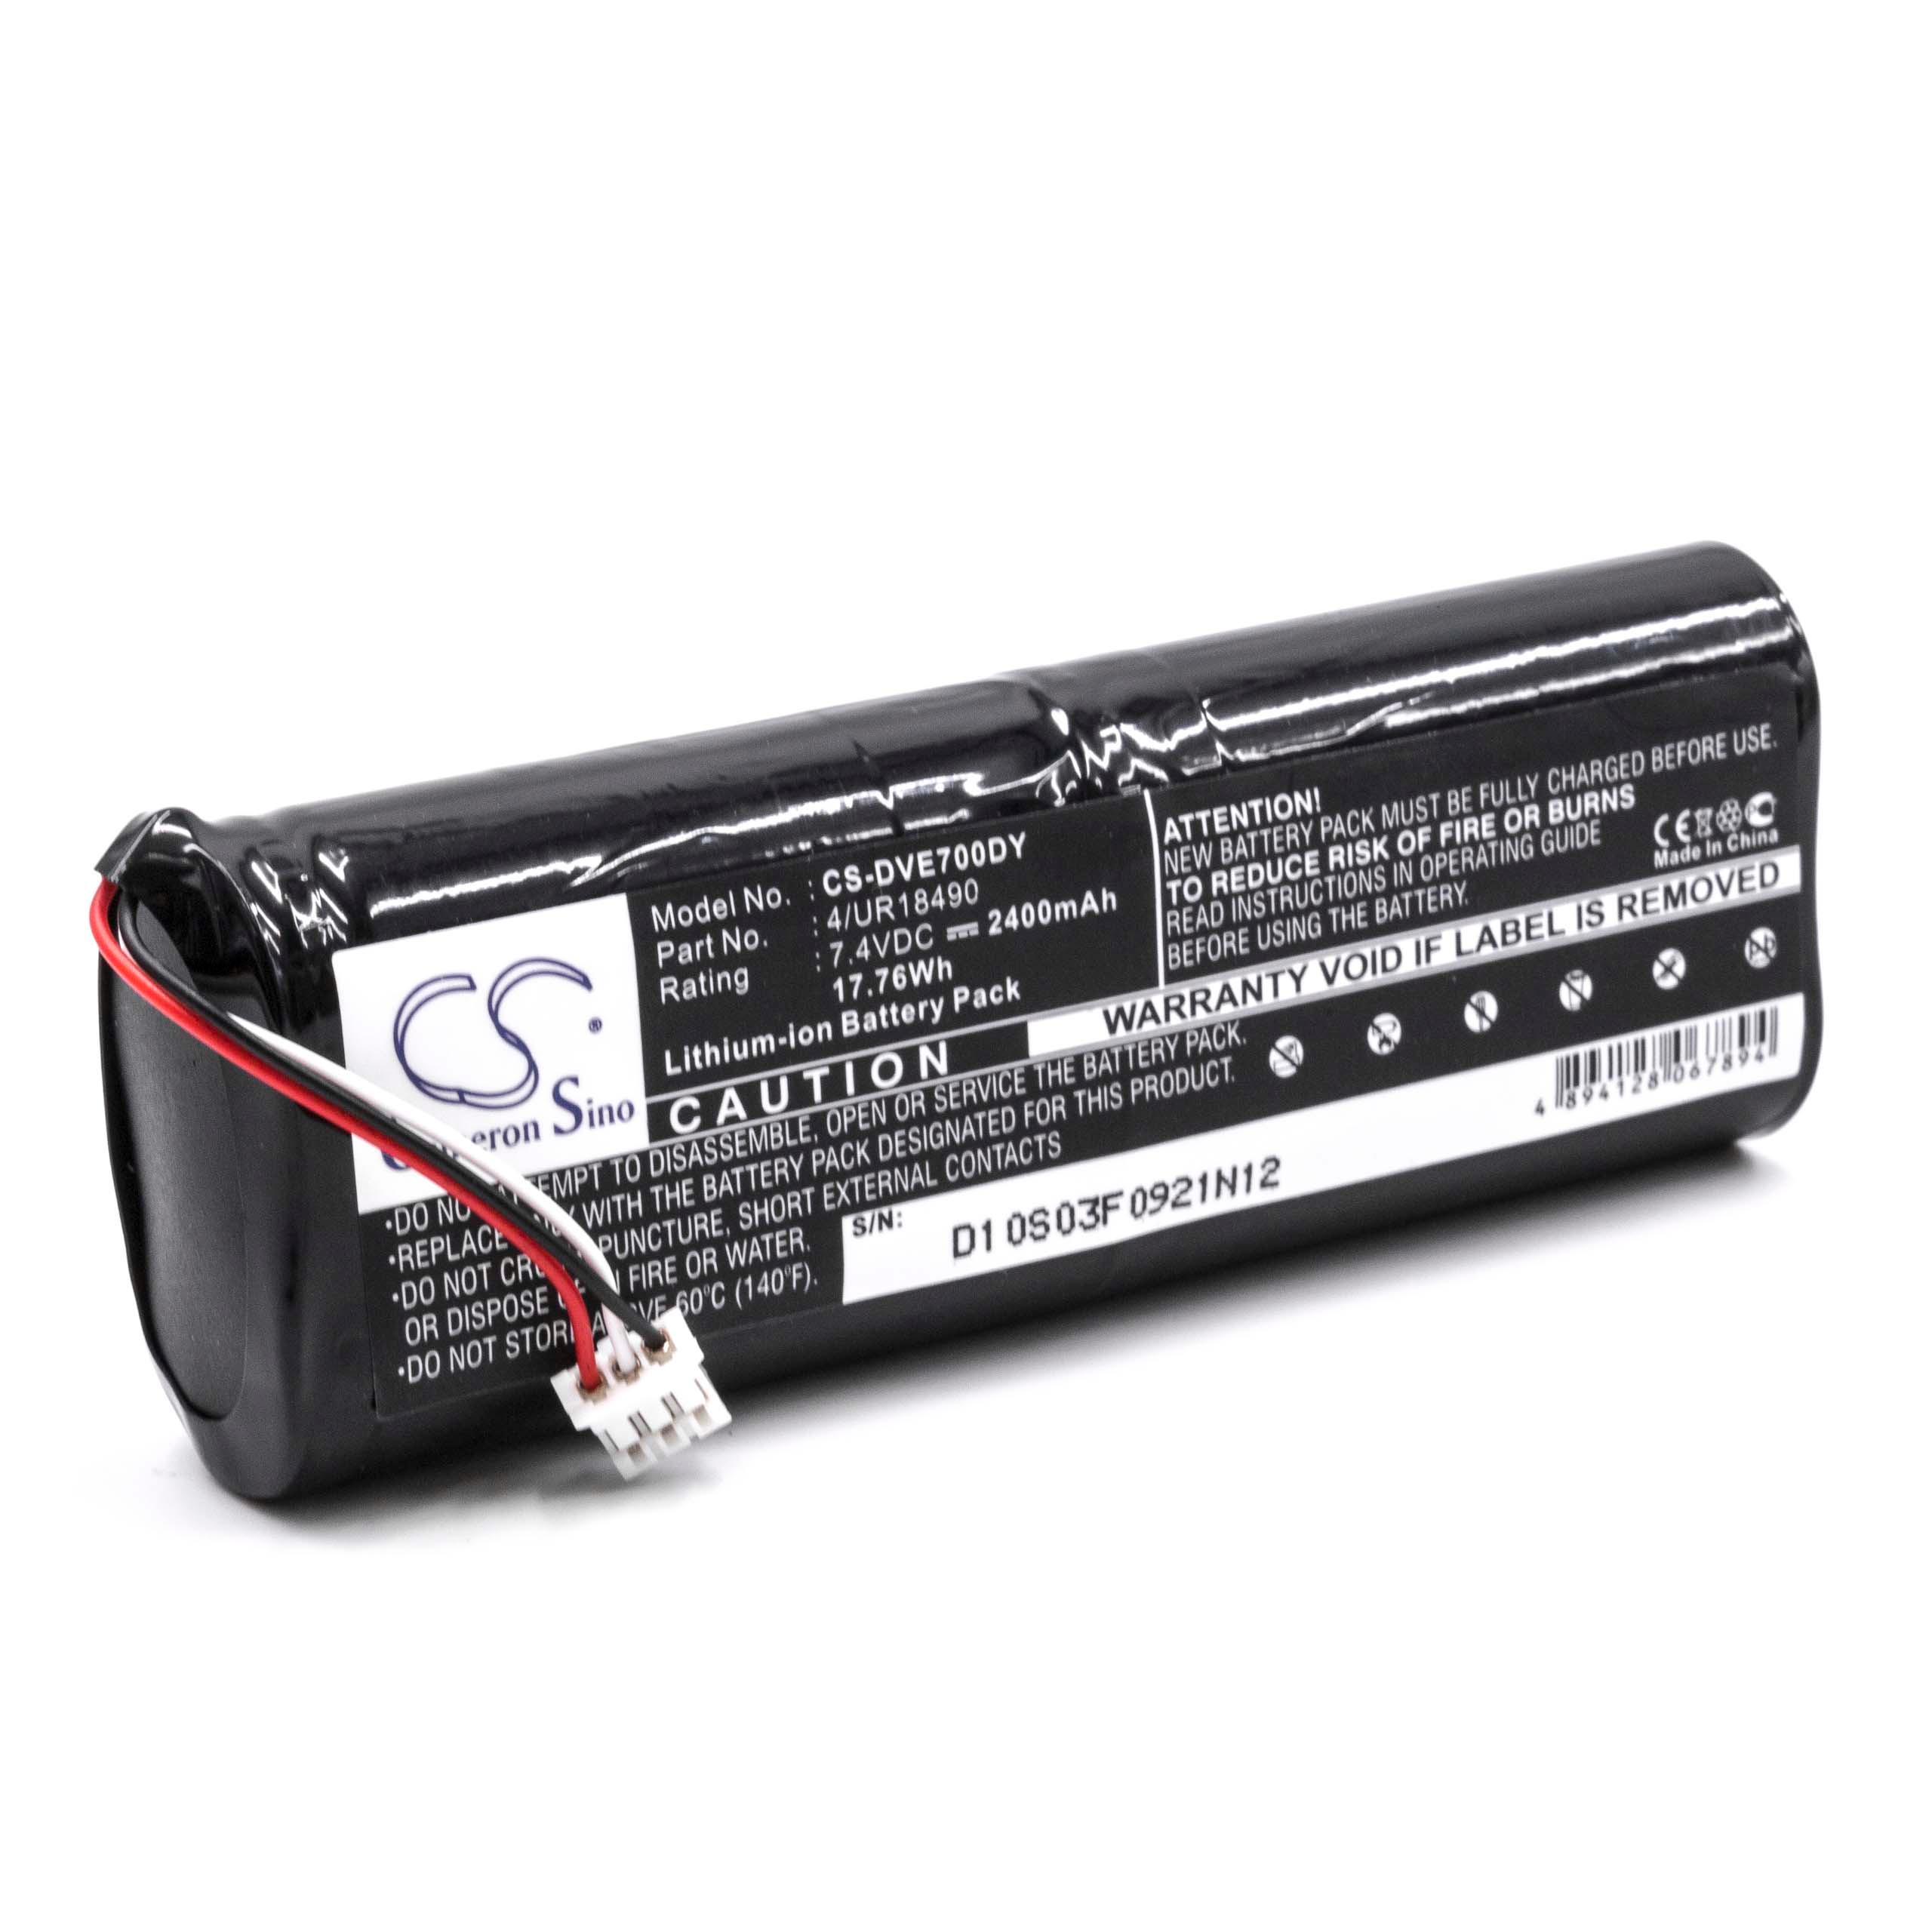 DVD Player Battery Replacement for Sony 4/UR18490 - 2400mAh 7.4V Li-Ion